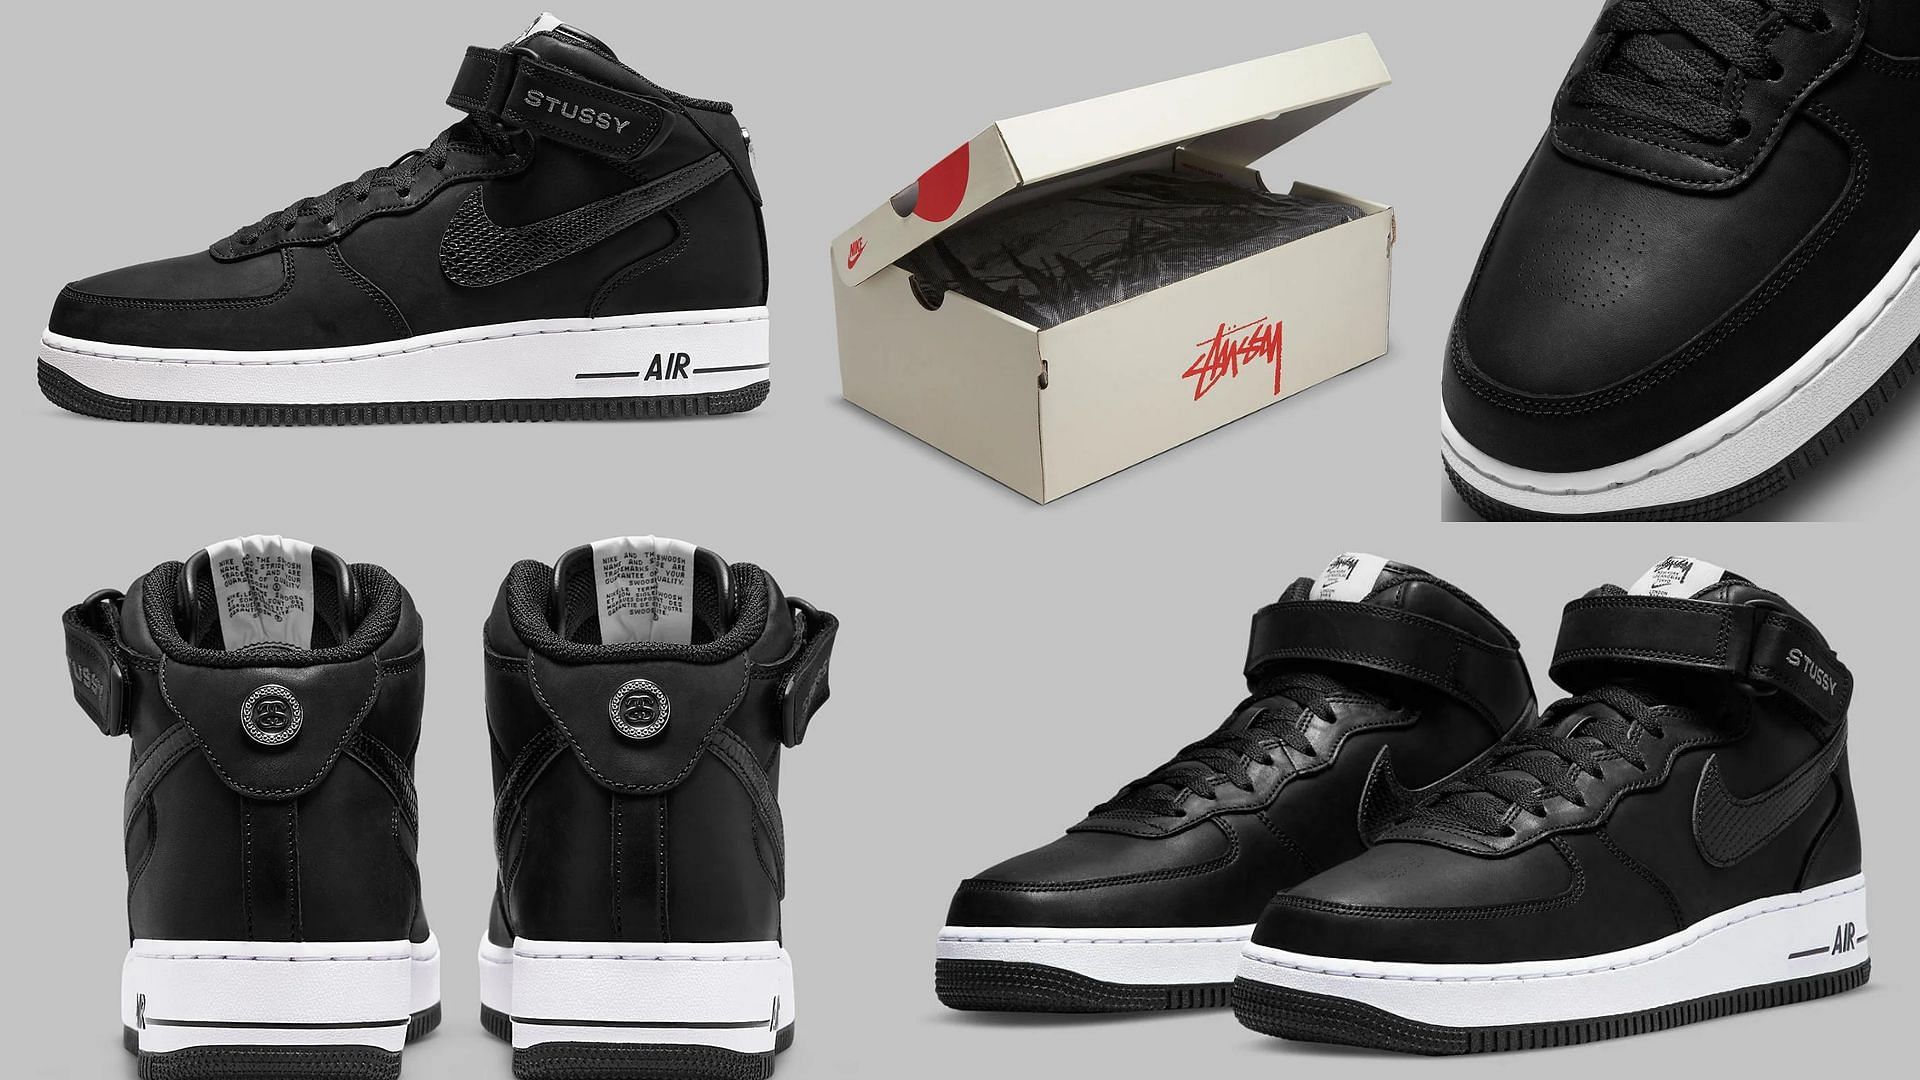 Stussy X Nike Air Force 1 Mid Black: Where to buy, price and more